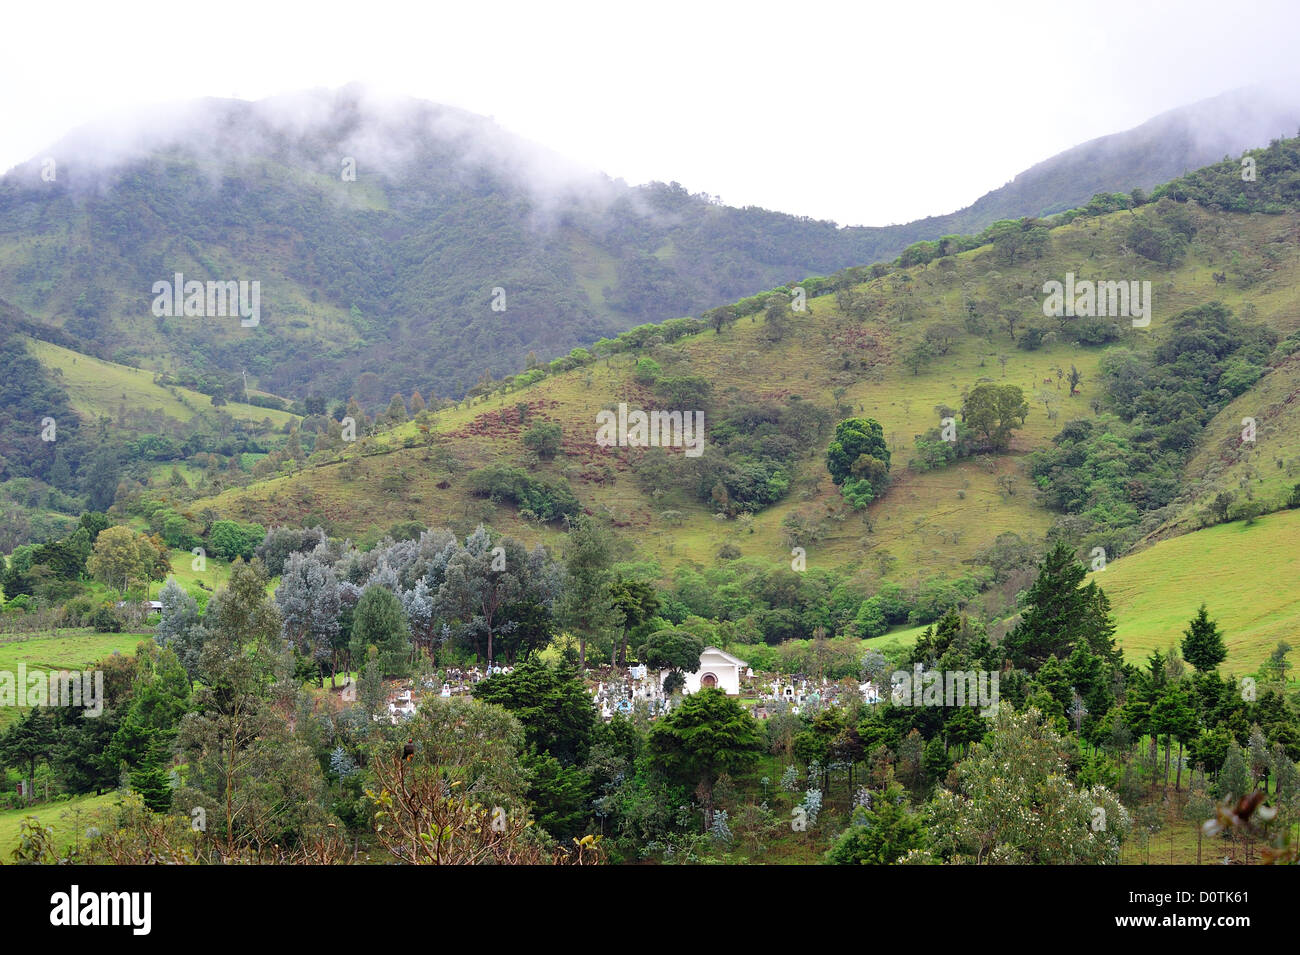 Cemetery, hill, landscape, andes, storm, stormy, lush, mountains, Totoro, Navado de Huilo, Colombia, South America Stock Photo